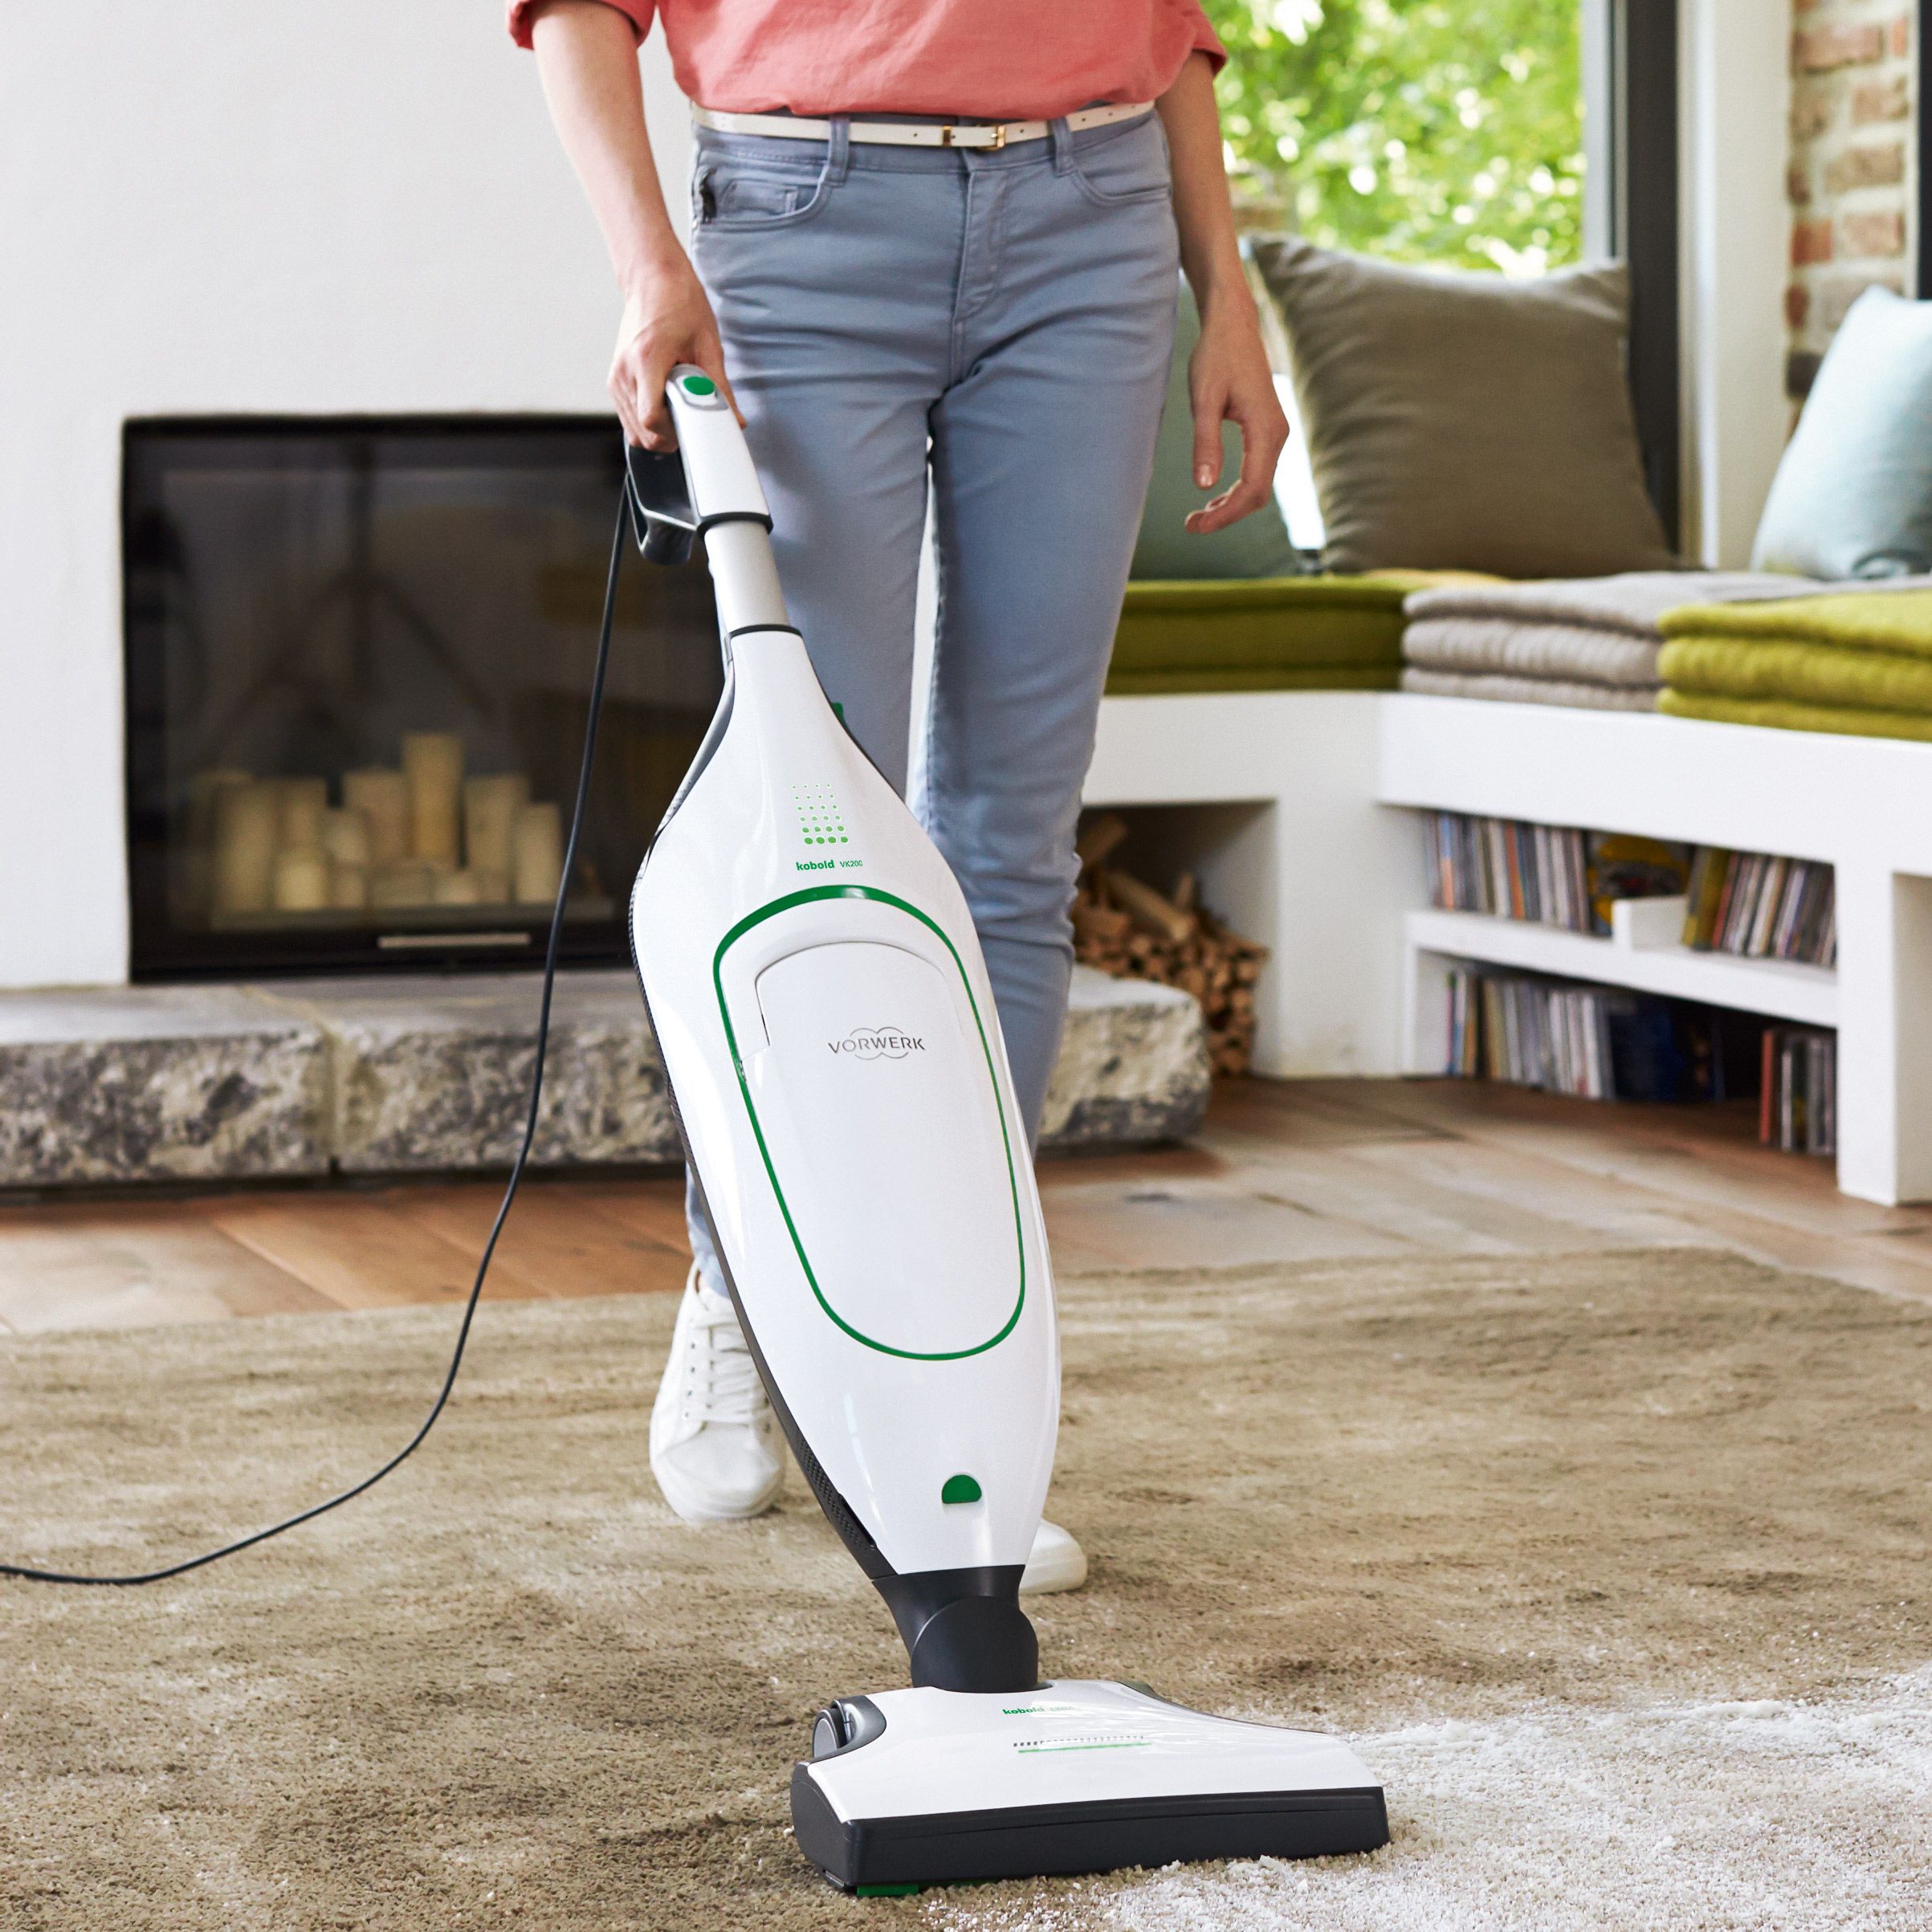 simpatía arco Miedo a morir Would you pay £1500 for a vacuum cleaner? - Good Housekeeping